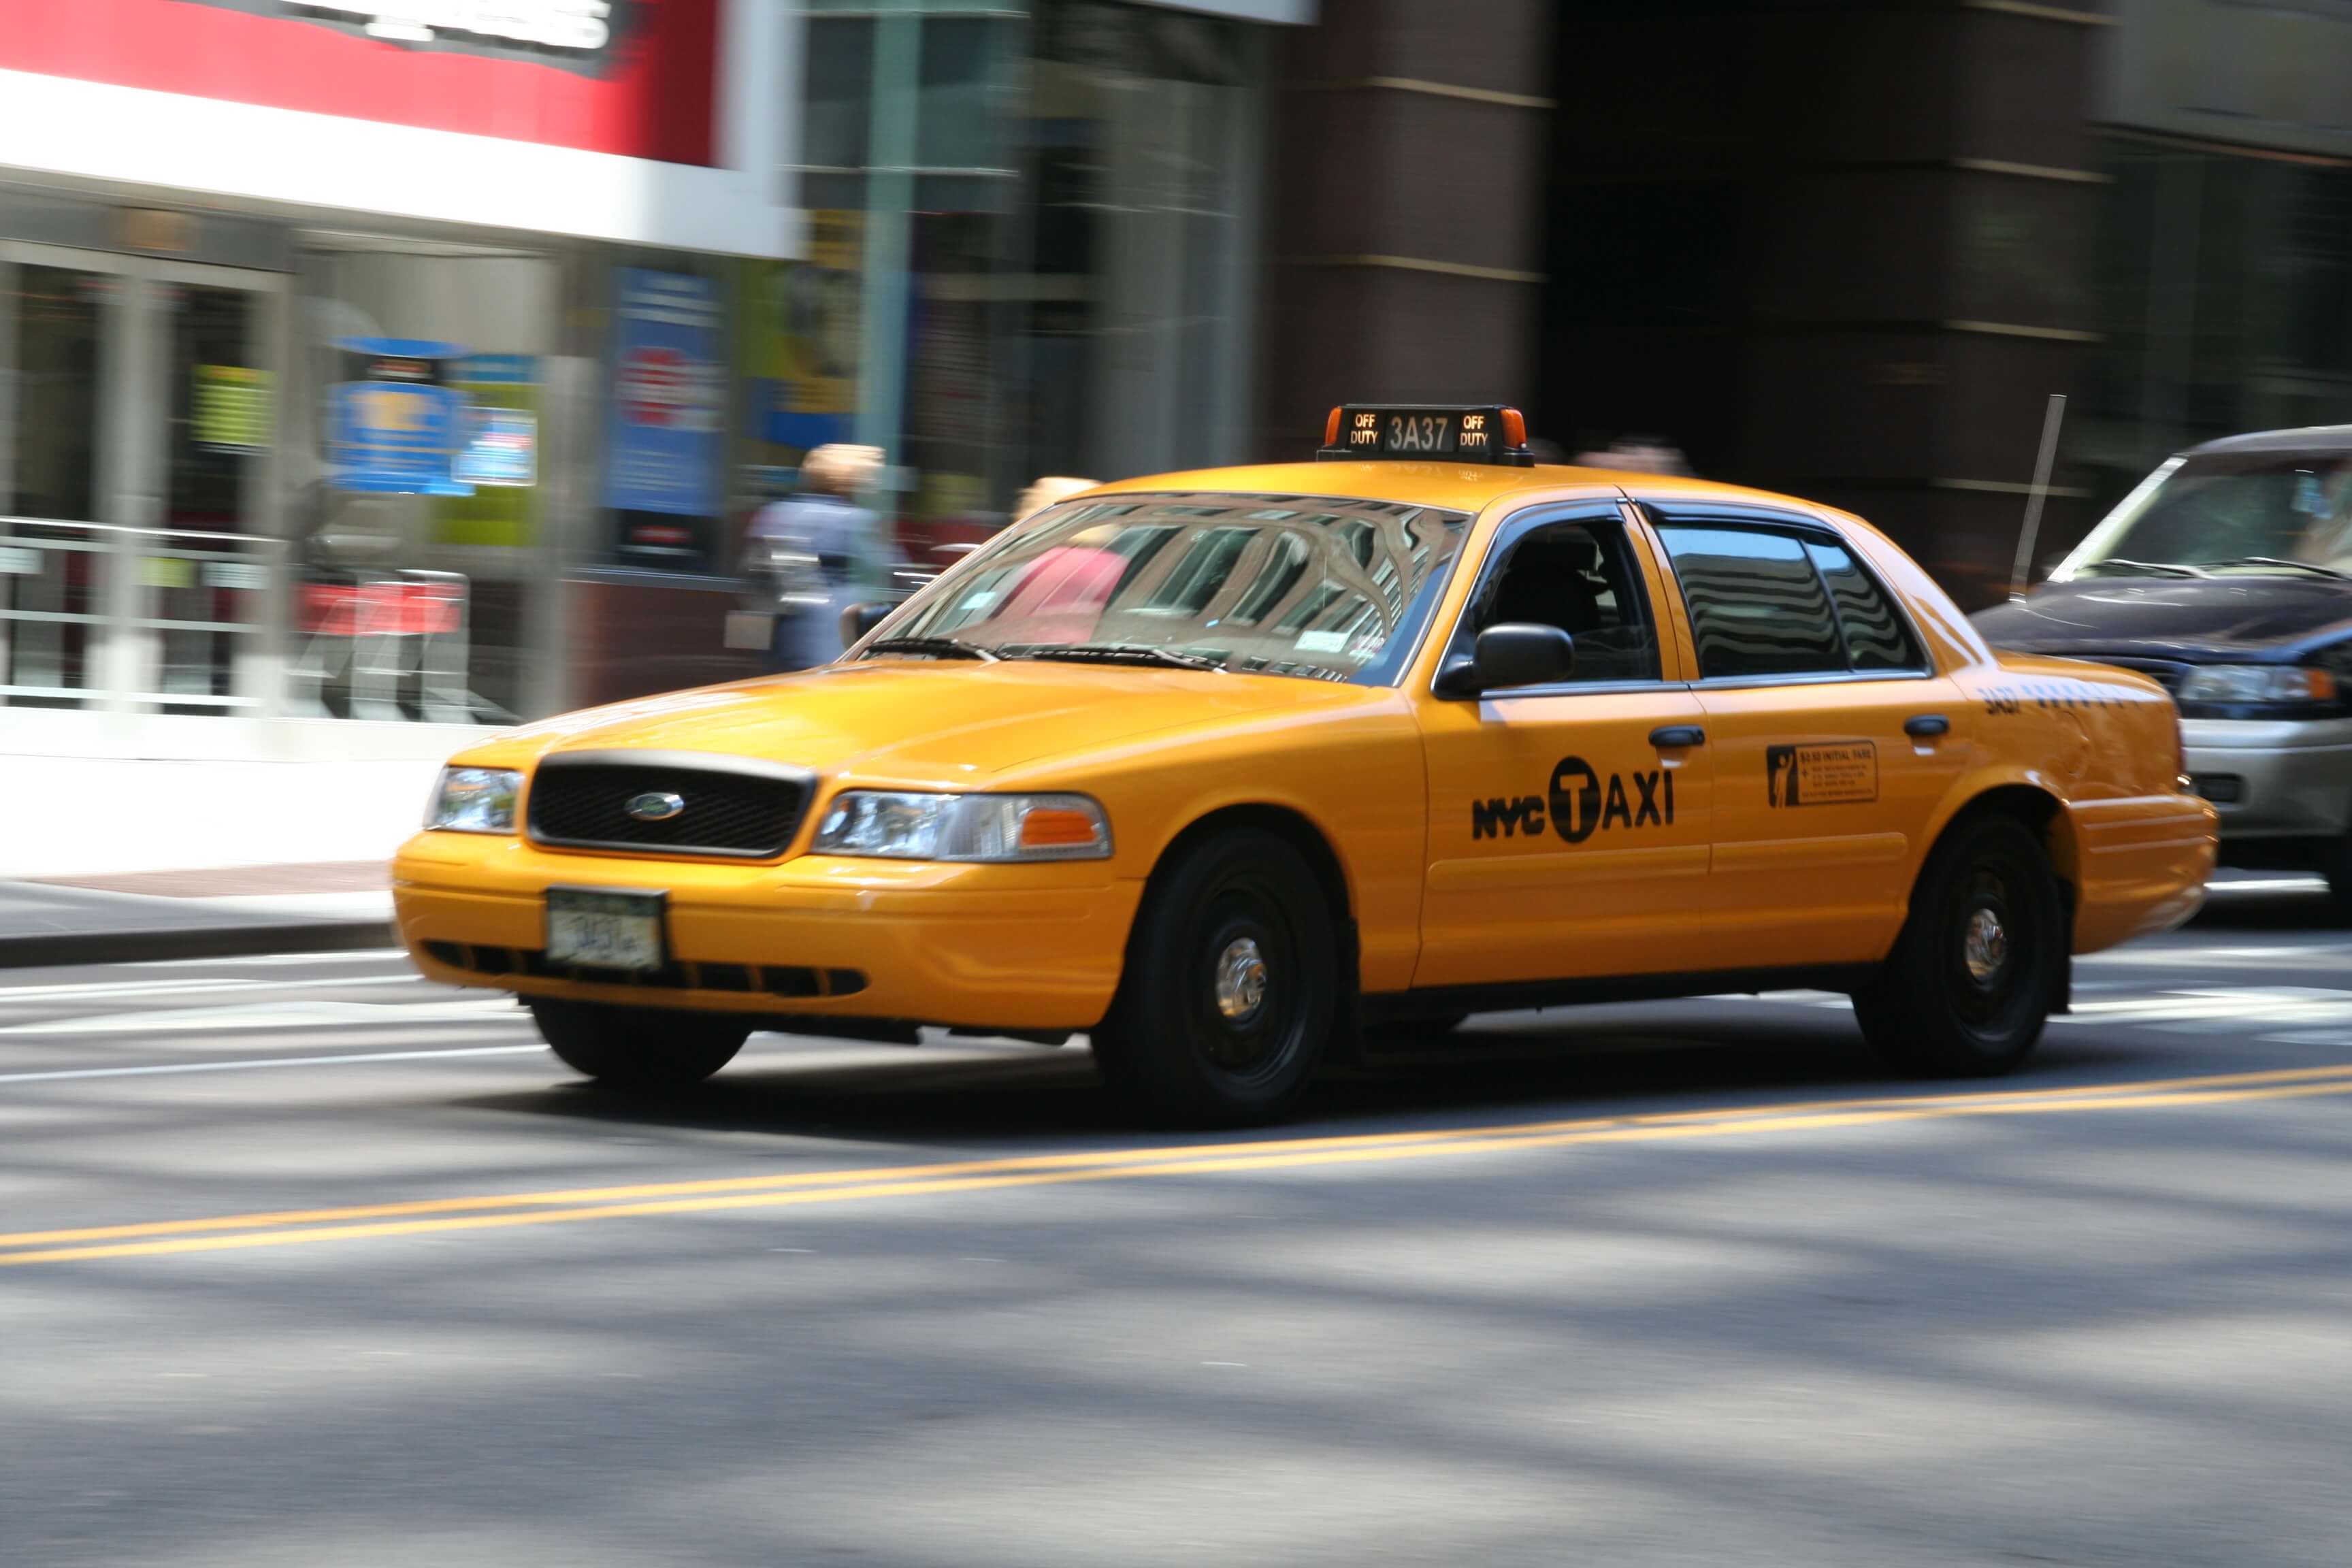 NYC Taxis are going head-to with Uber using Arro!